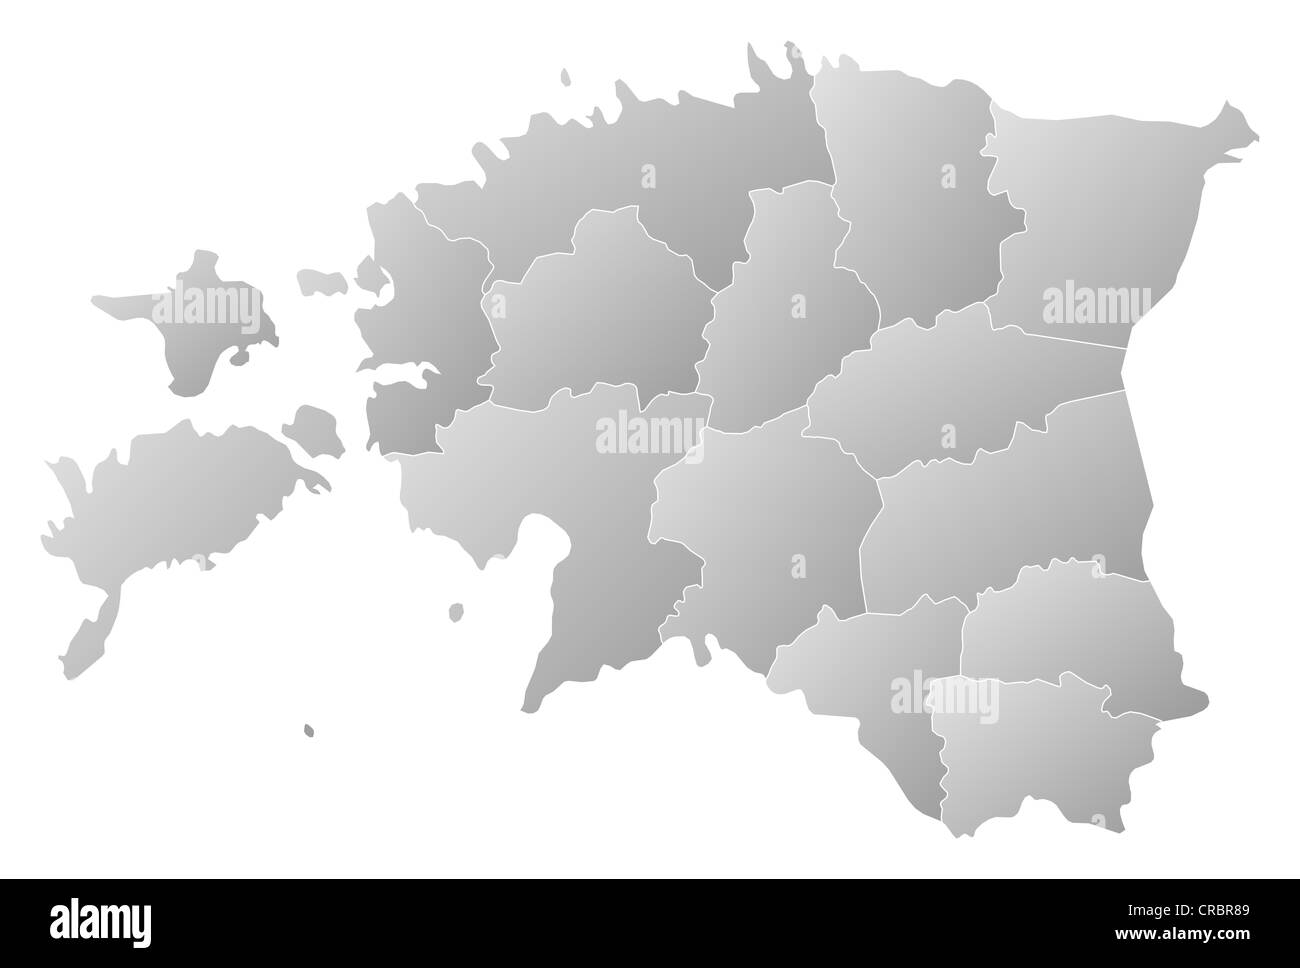 Political map of Estonia with the several counties. Stock Photo